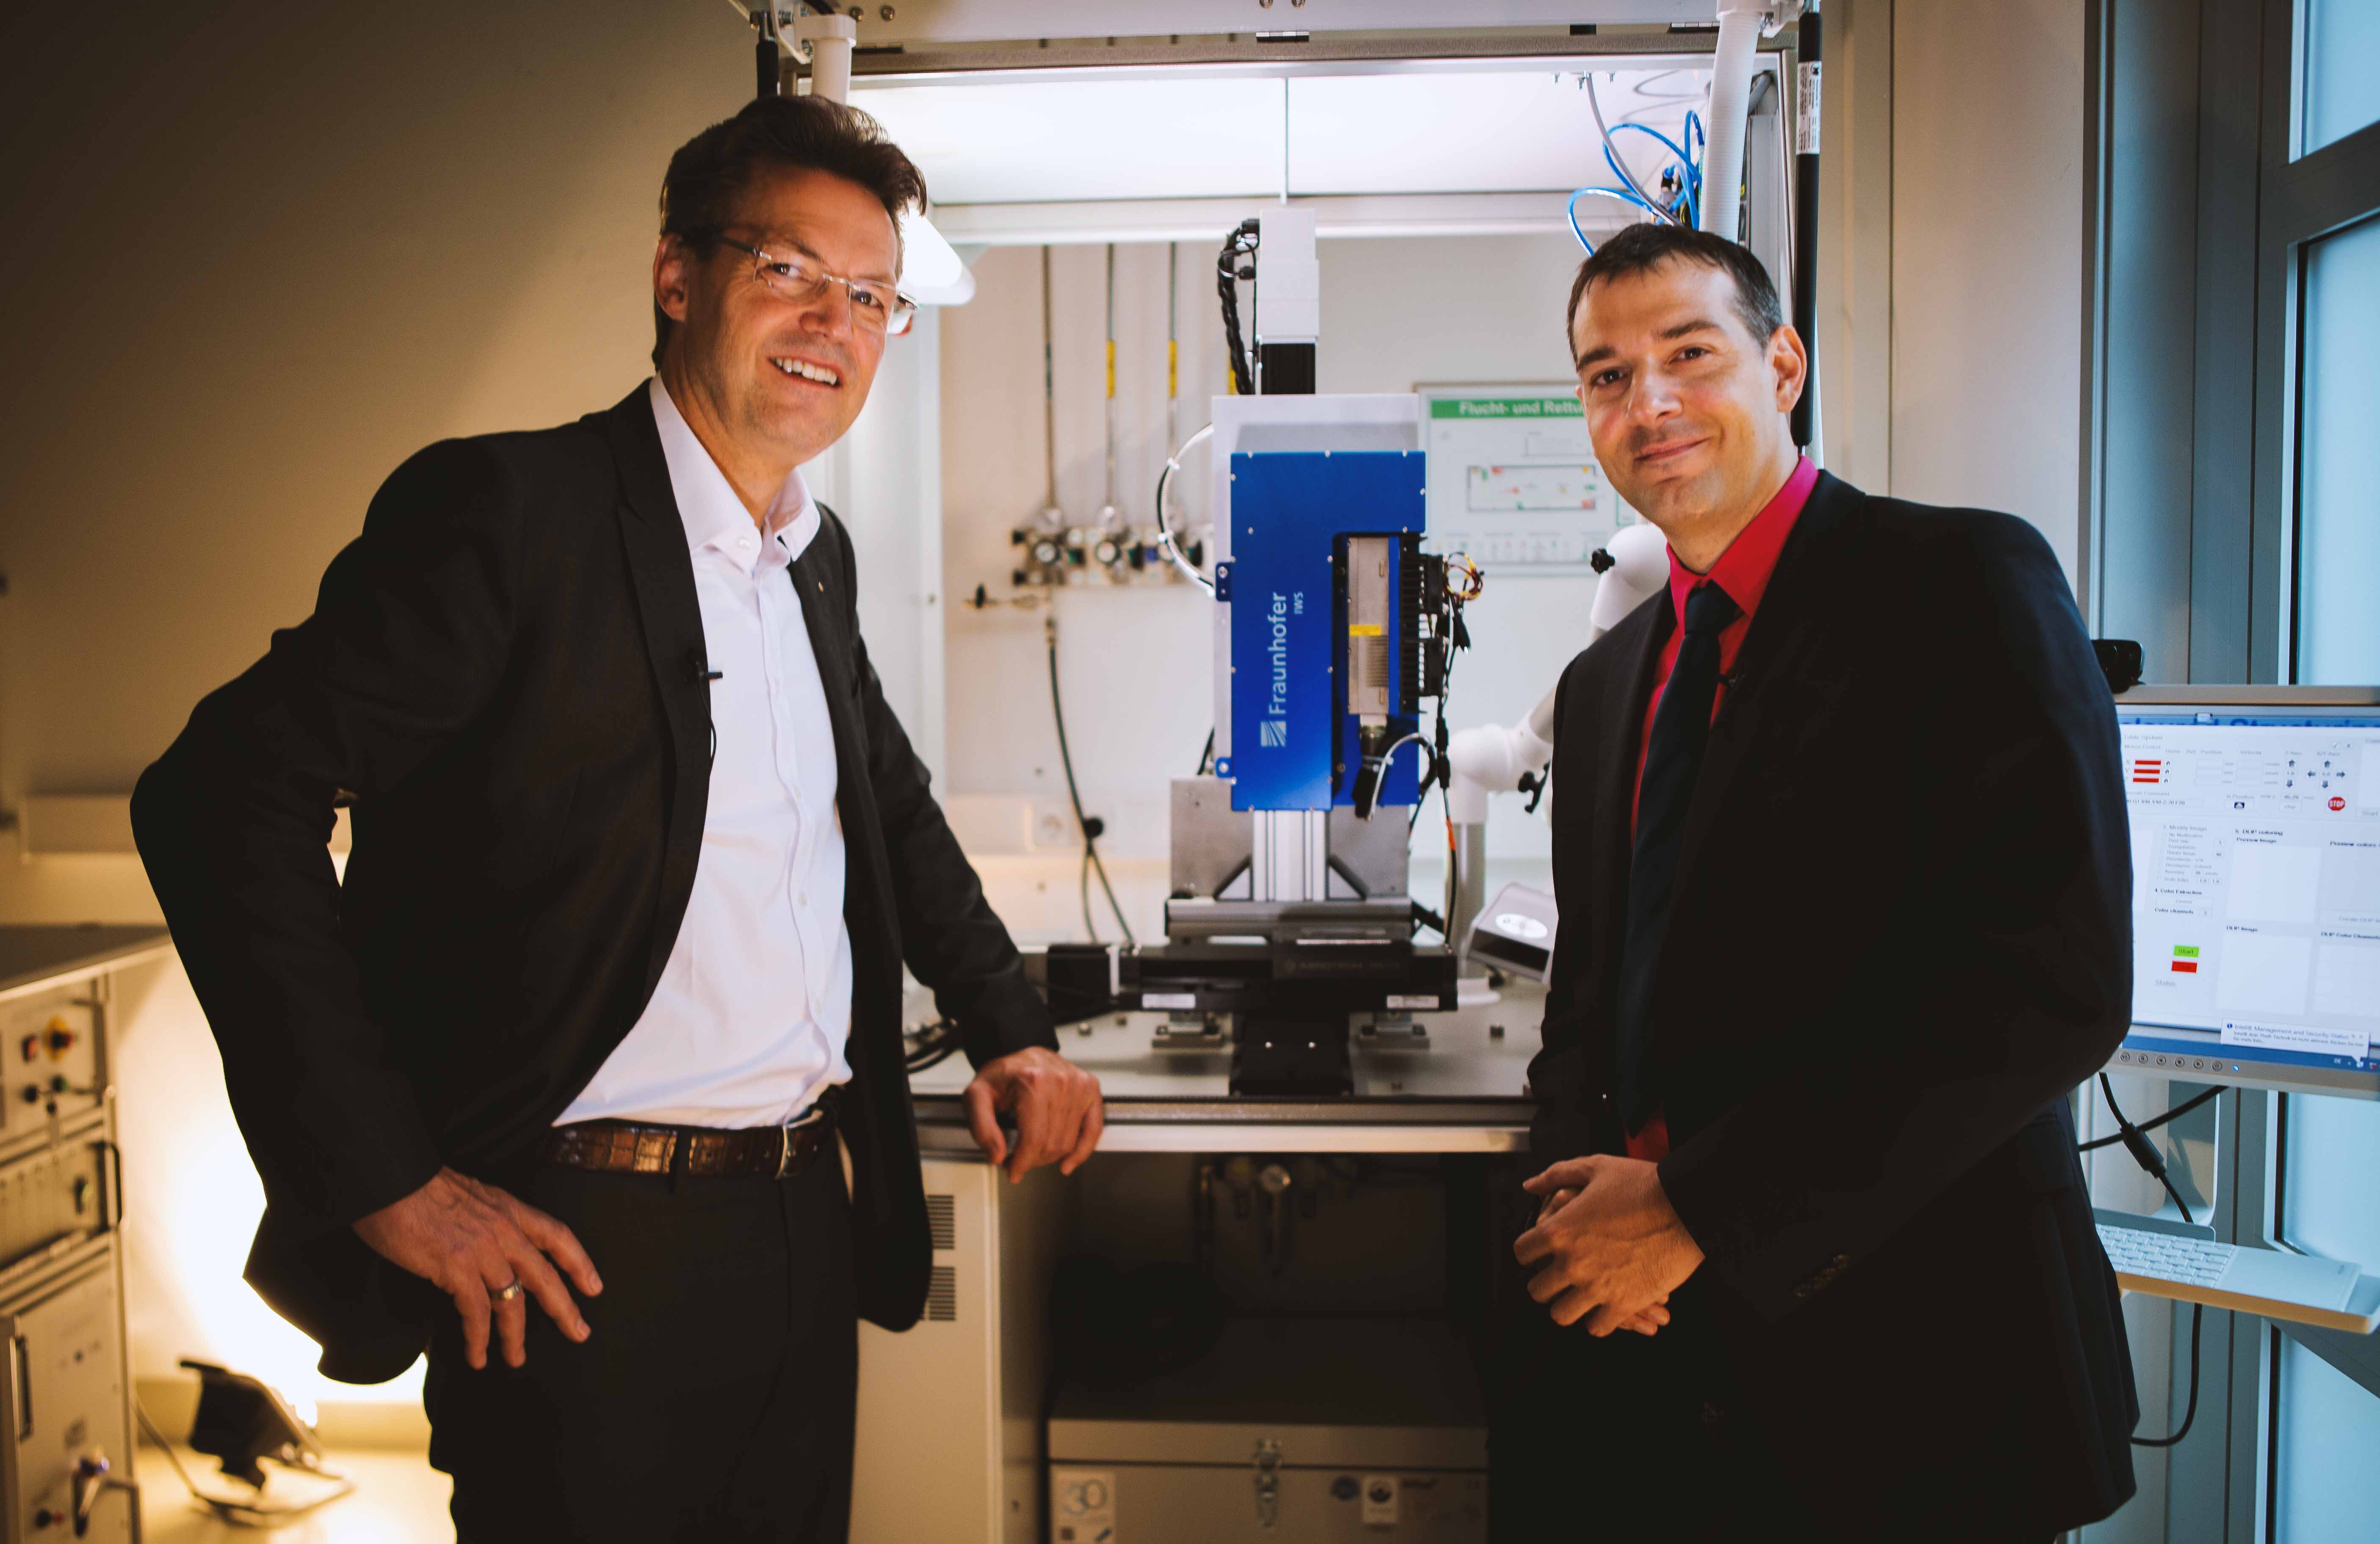 Prof. Frank Mücklich (left) and Prof. Andrés F. Lasagni (right) in front of the DLIP µFAB system, developed at Fraunhofer IWS